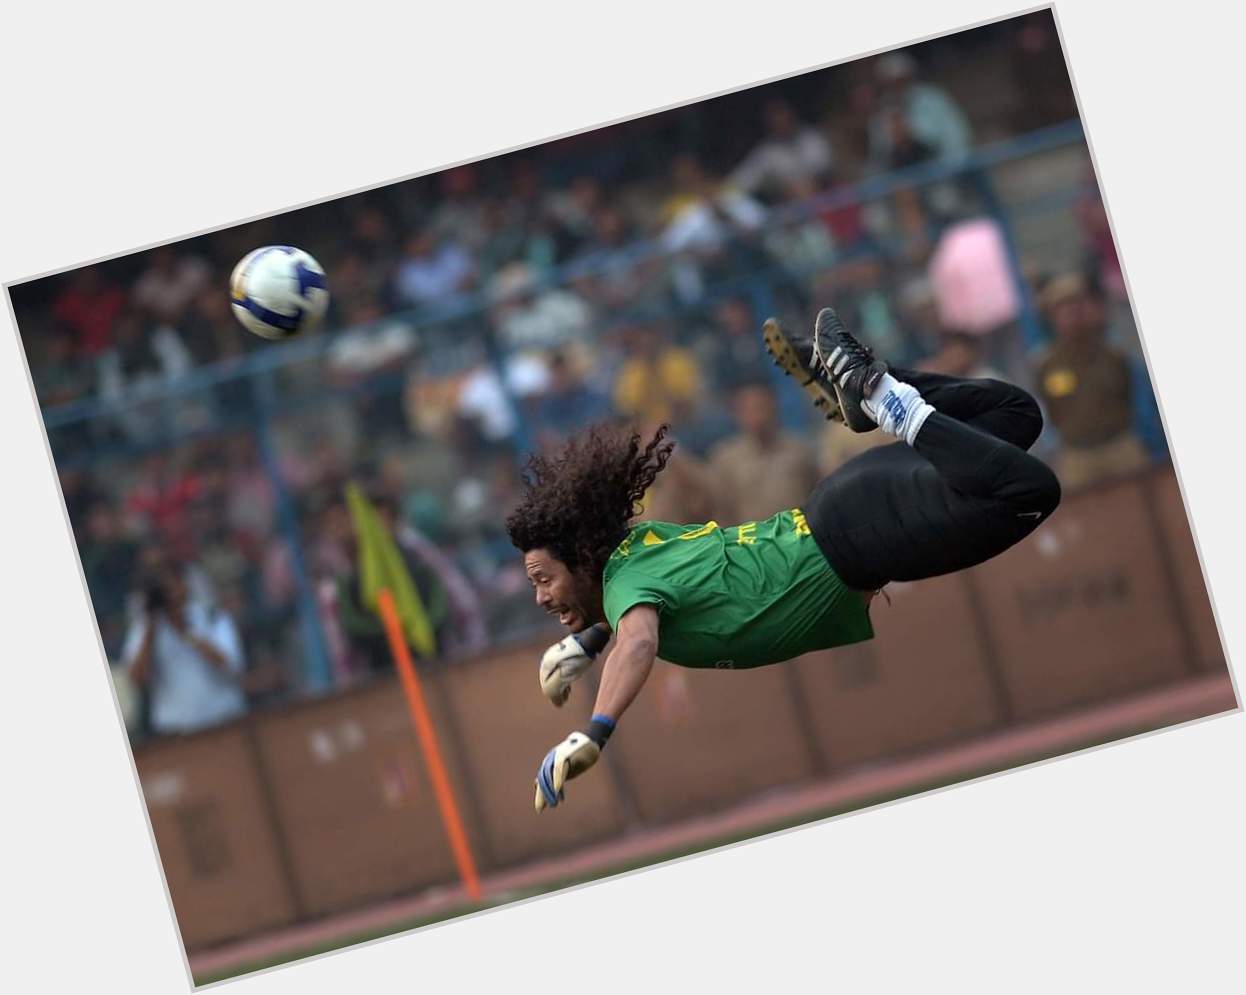 Happy birthday, Rene Higuita! The man who made the greatest save in history...
.
.
.
.
.
. 
Pict : 